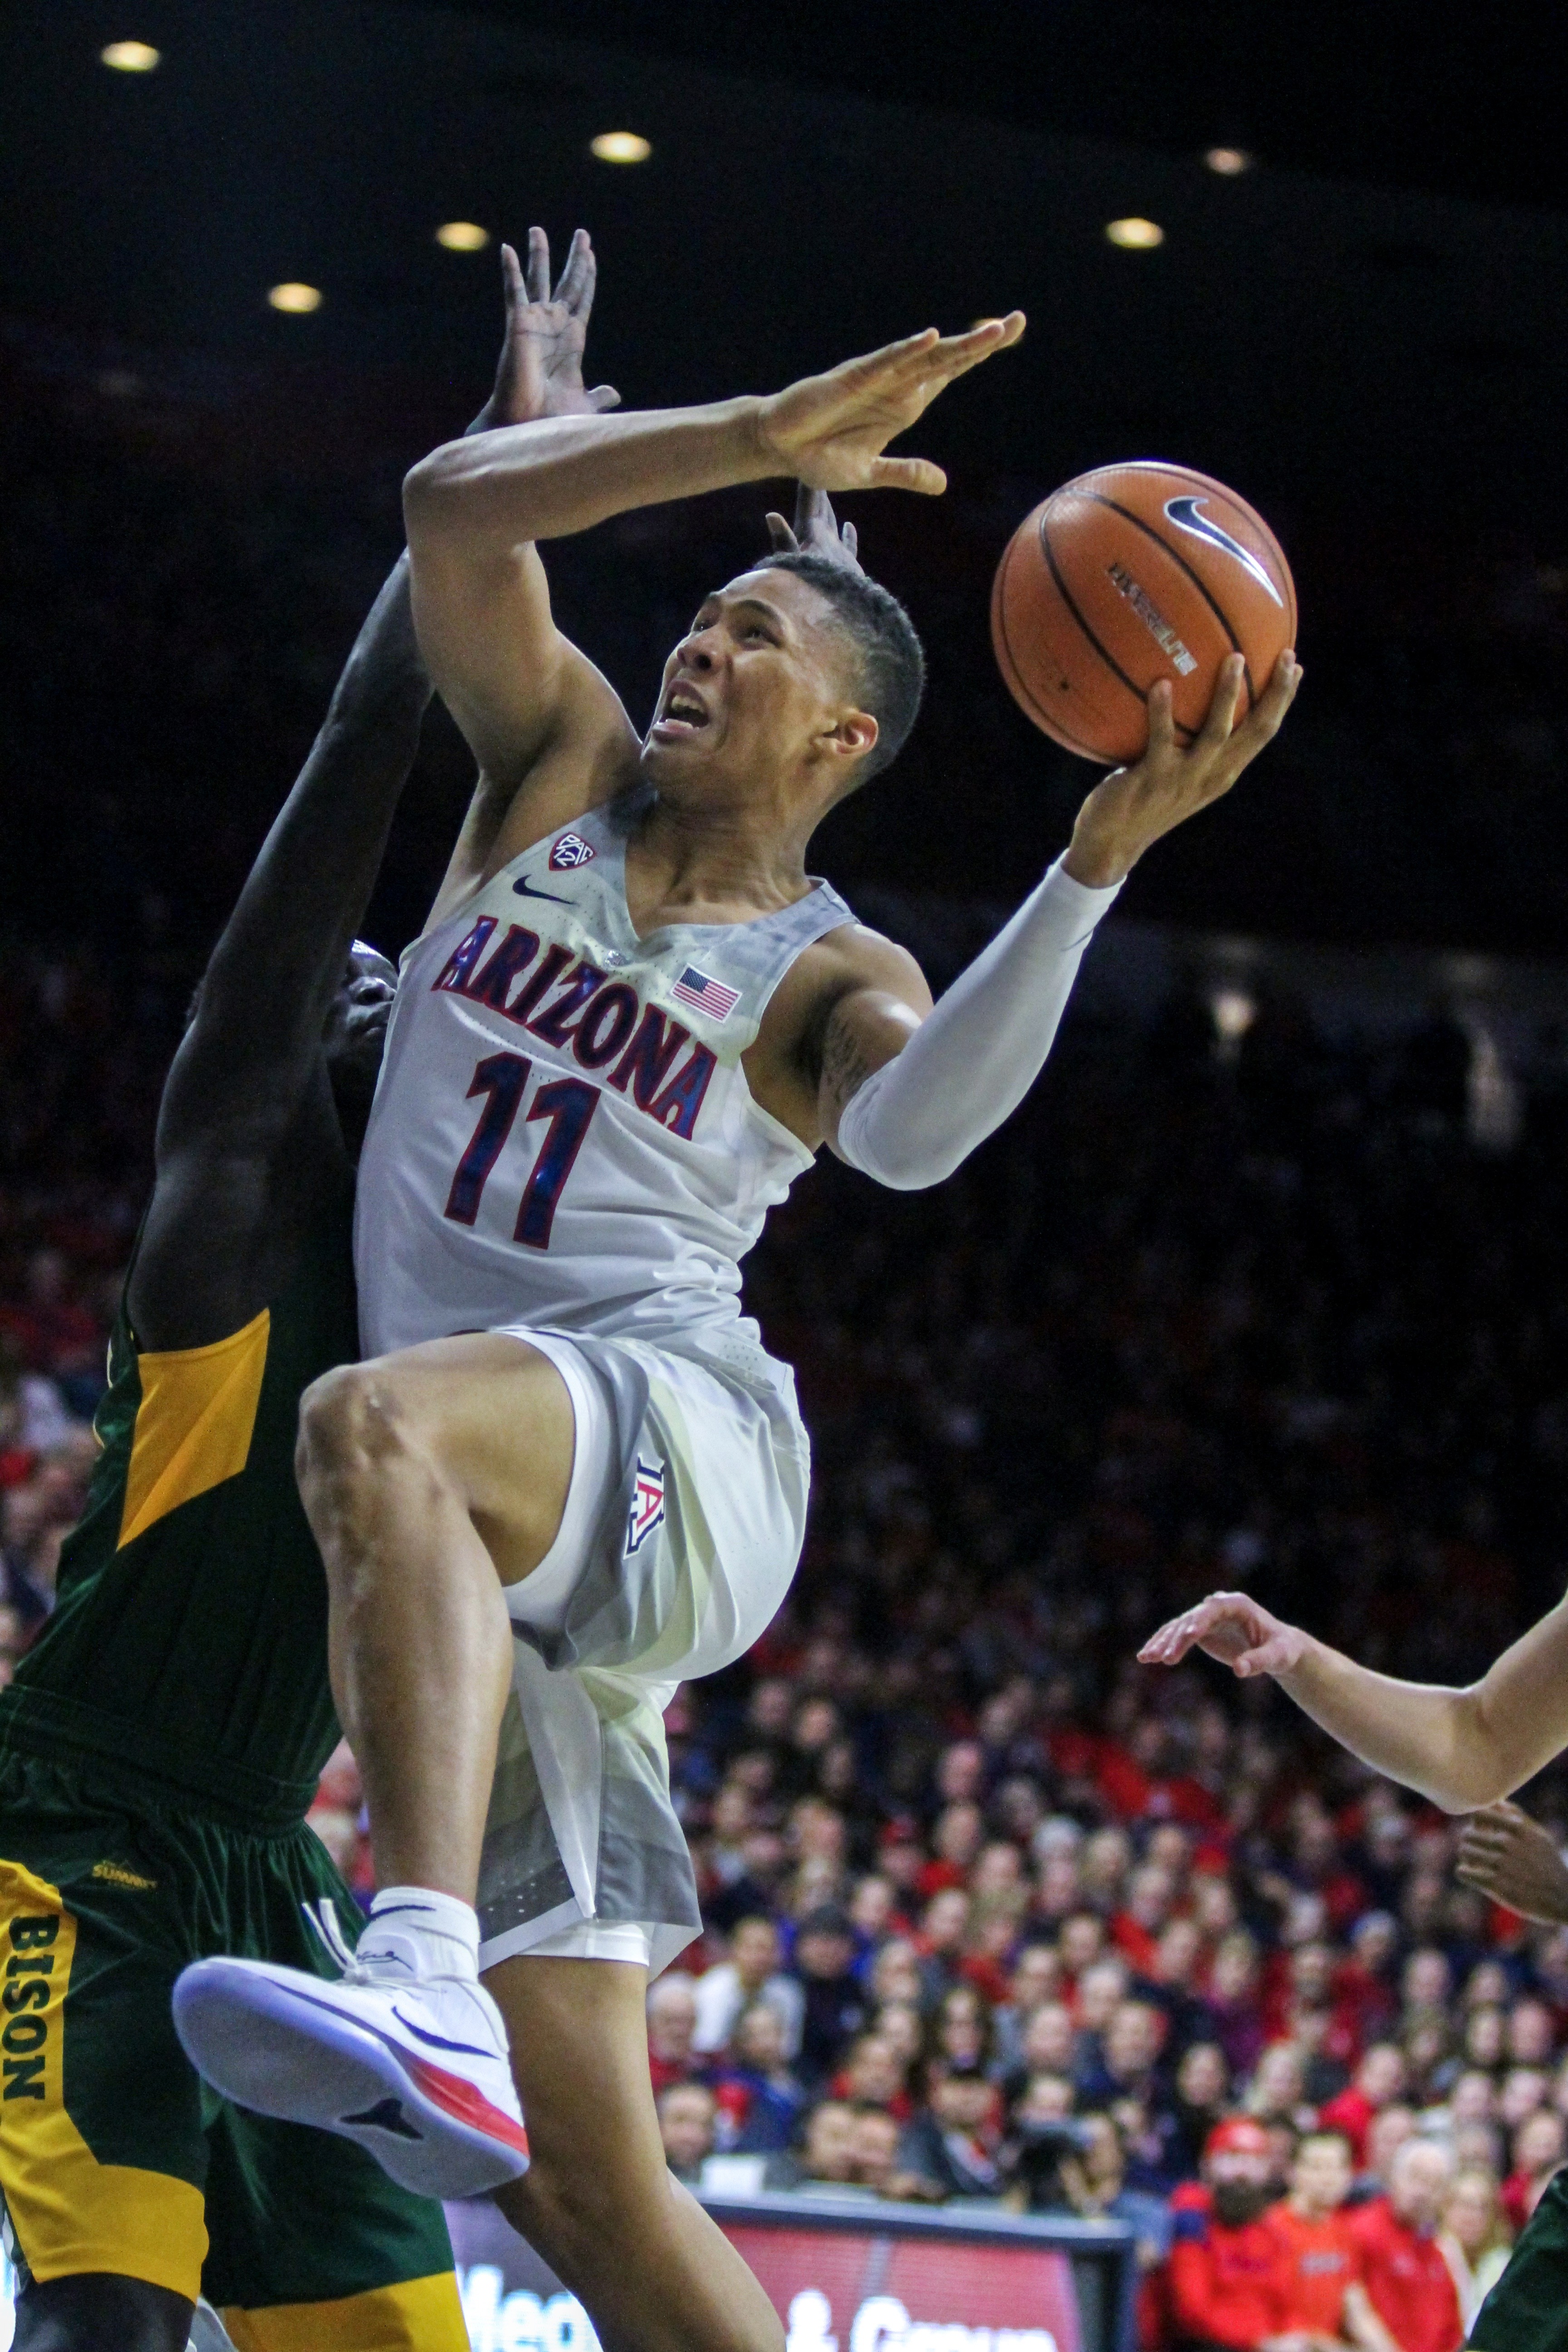 Arizona forward Ira Lee cited for Driving Under the Influence | The Range